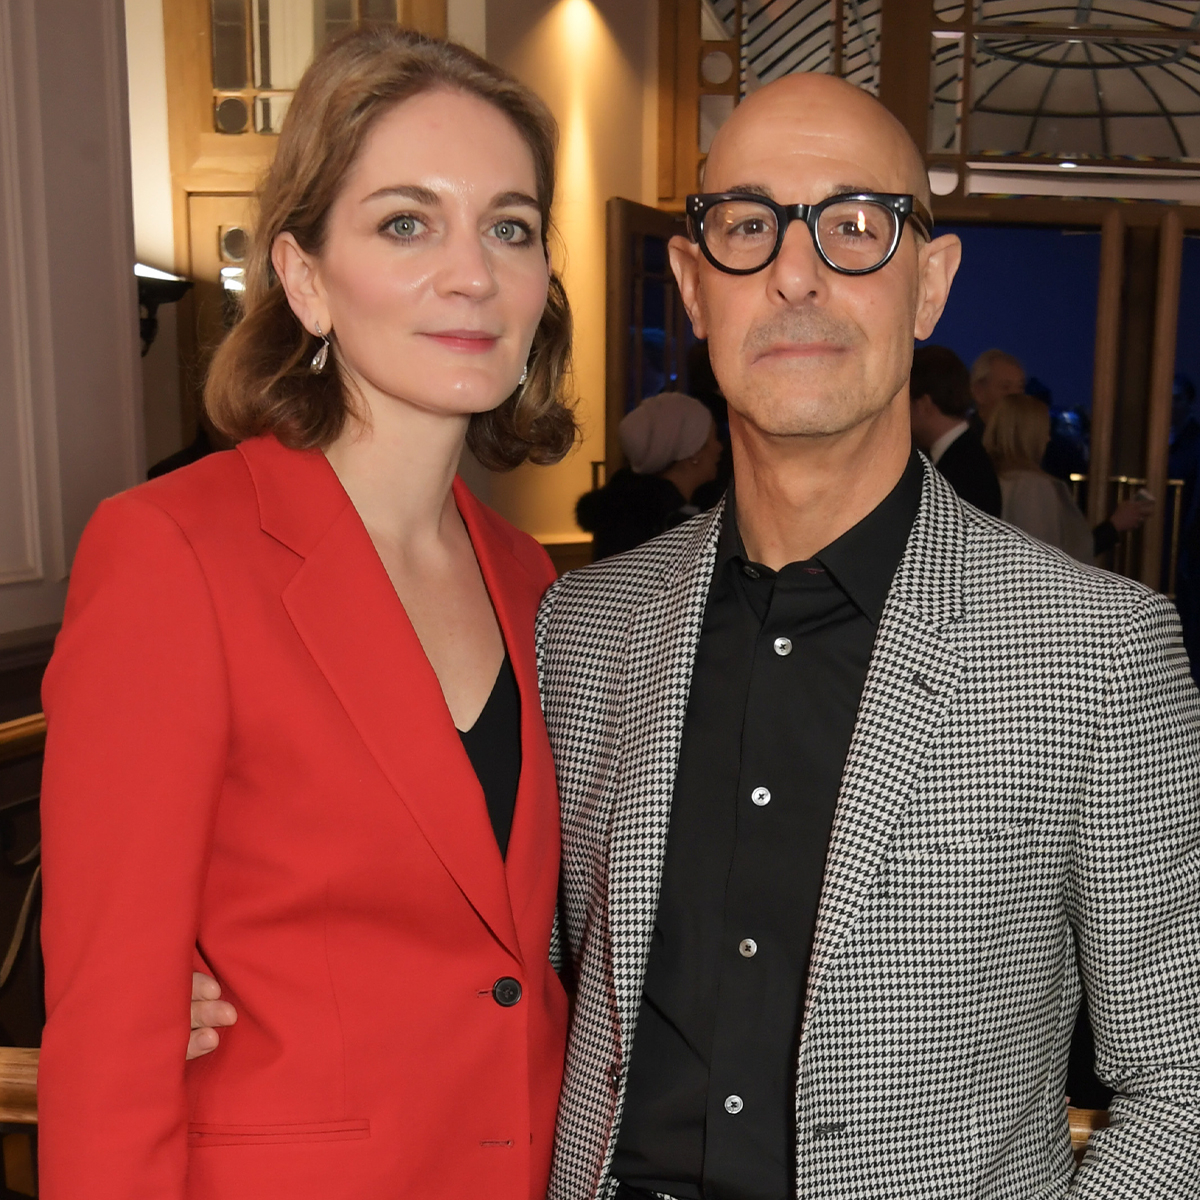 https://akns-images.eonline.com/eol_images/Entire_Site/202341/rs_1200x1200-230501115252-1200-Felicity_Blunt-Stanley_Tucci_2020-gj.jpg?fit=around%7C1200:1200&output-quality=90&crop=1200:1200;center,top